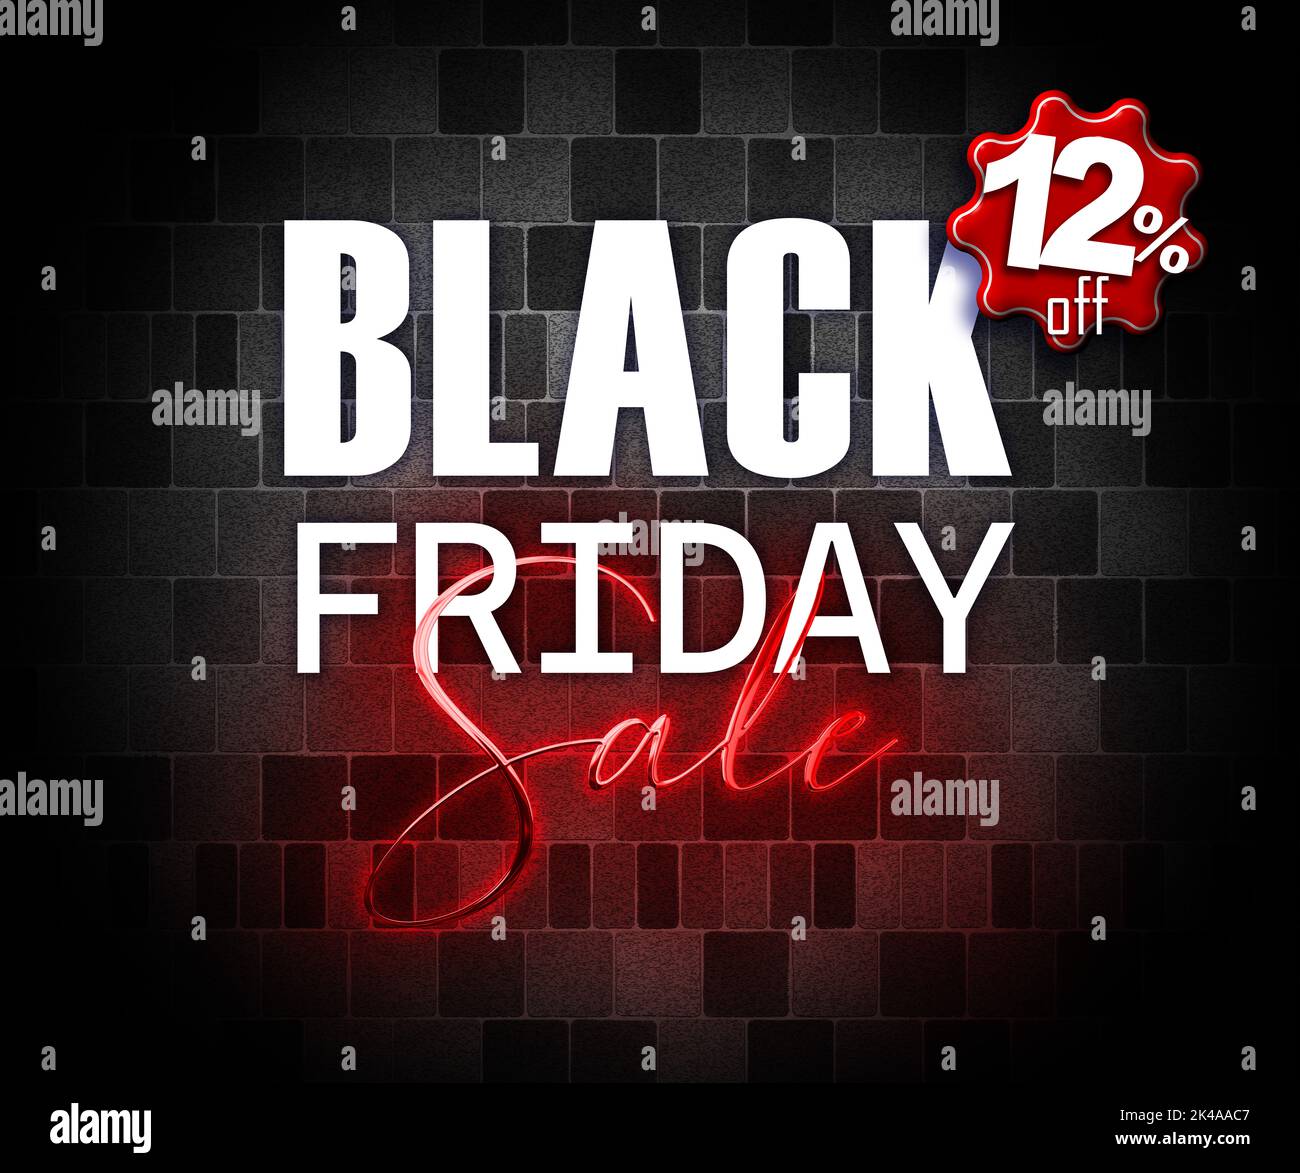 illustration with 3d elements black friday promotion banner 12 percent off sales increase Stock Photo